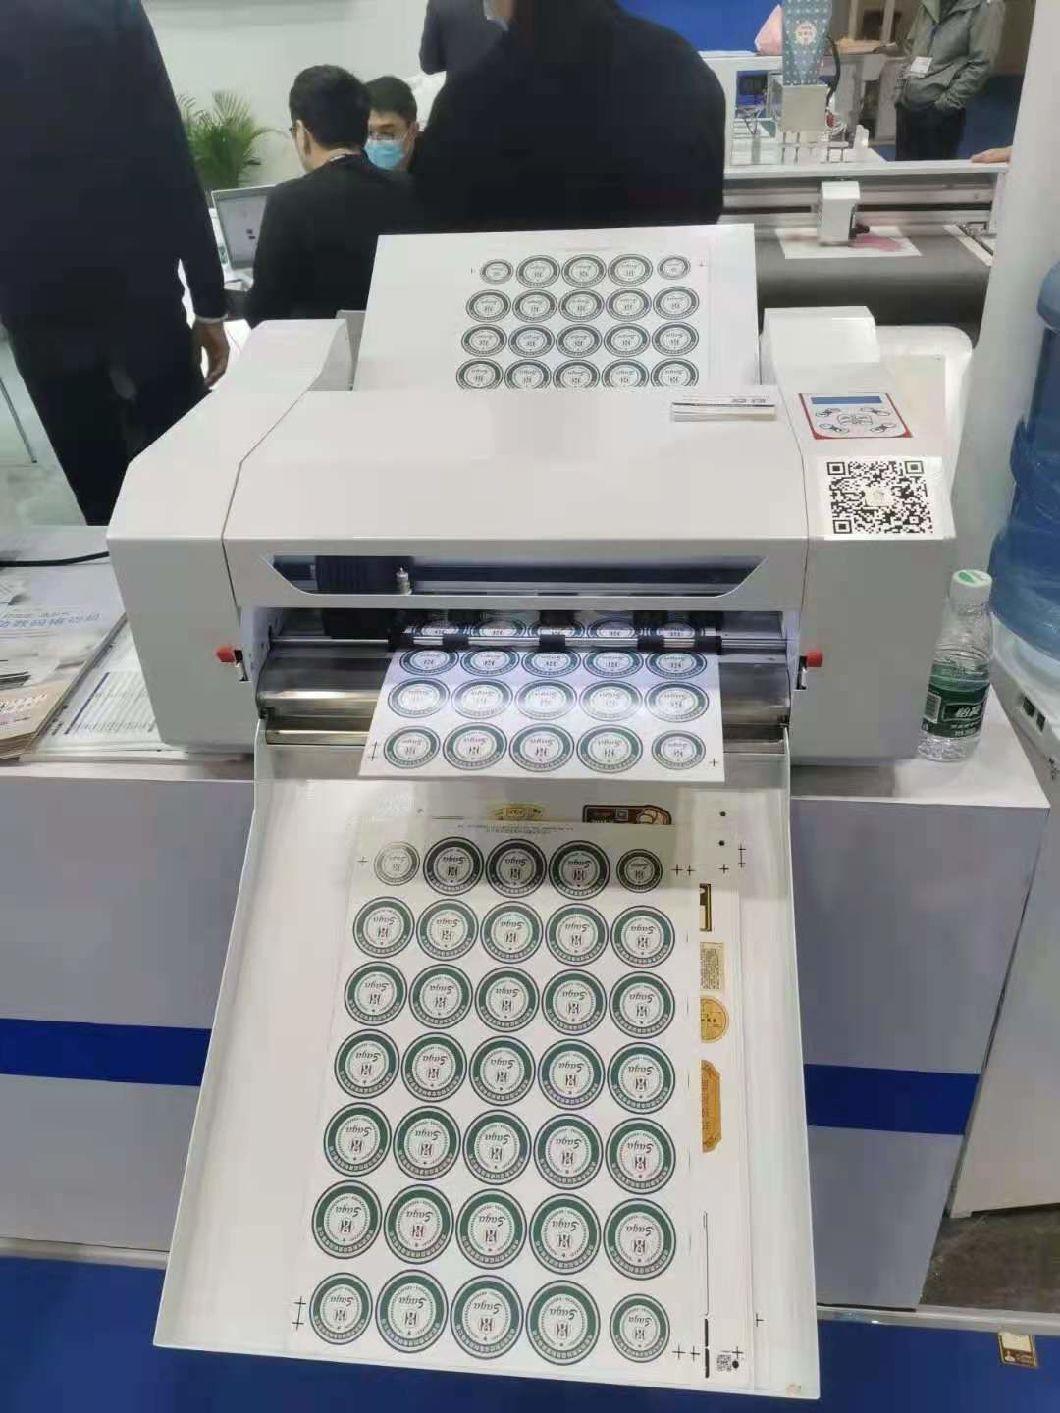 Automatic Adsorbed Durable Digital Feeding Die Sheet to Sheet Economical Cutter Plotter for Cutting Stickers and Cardstocks Laser